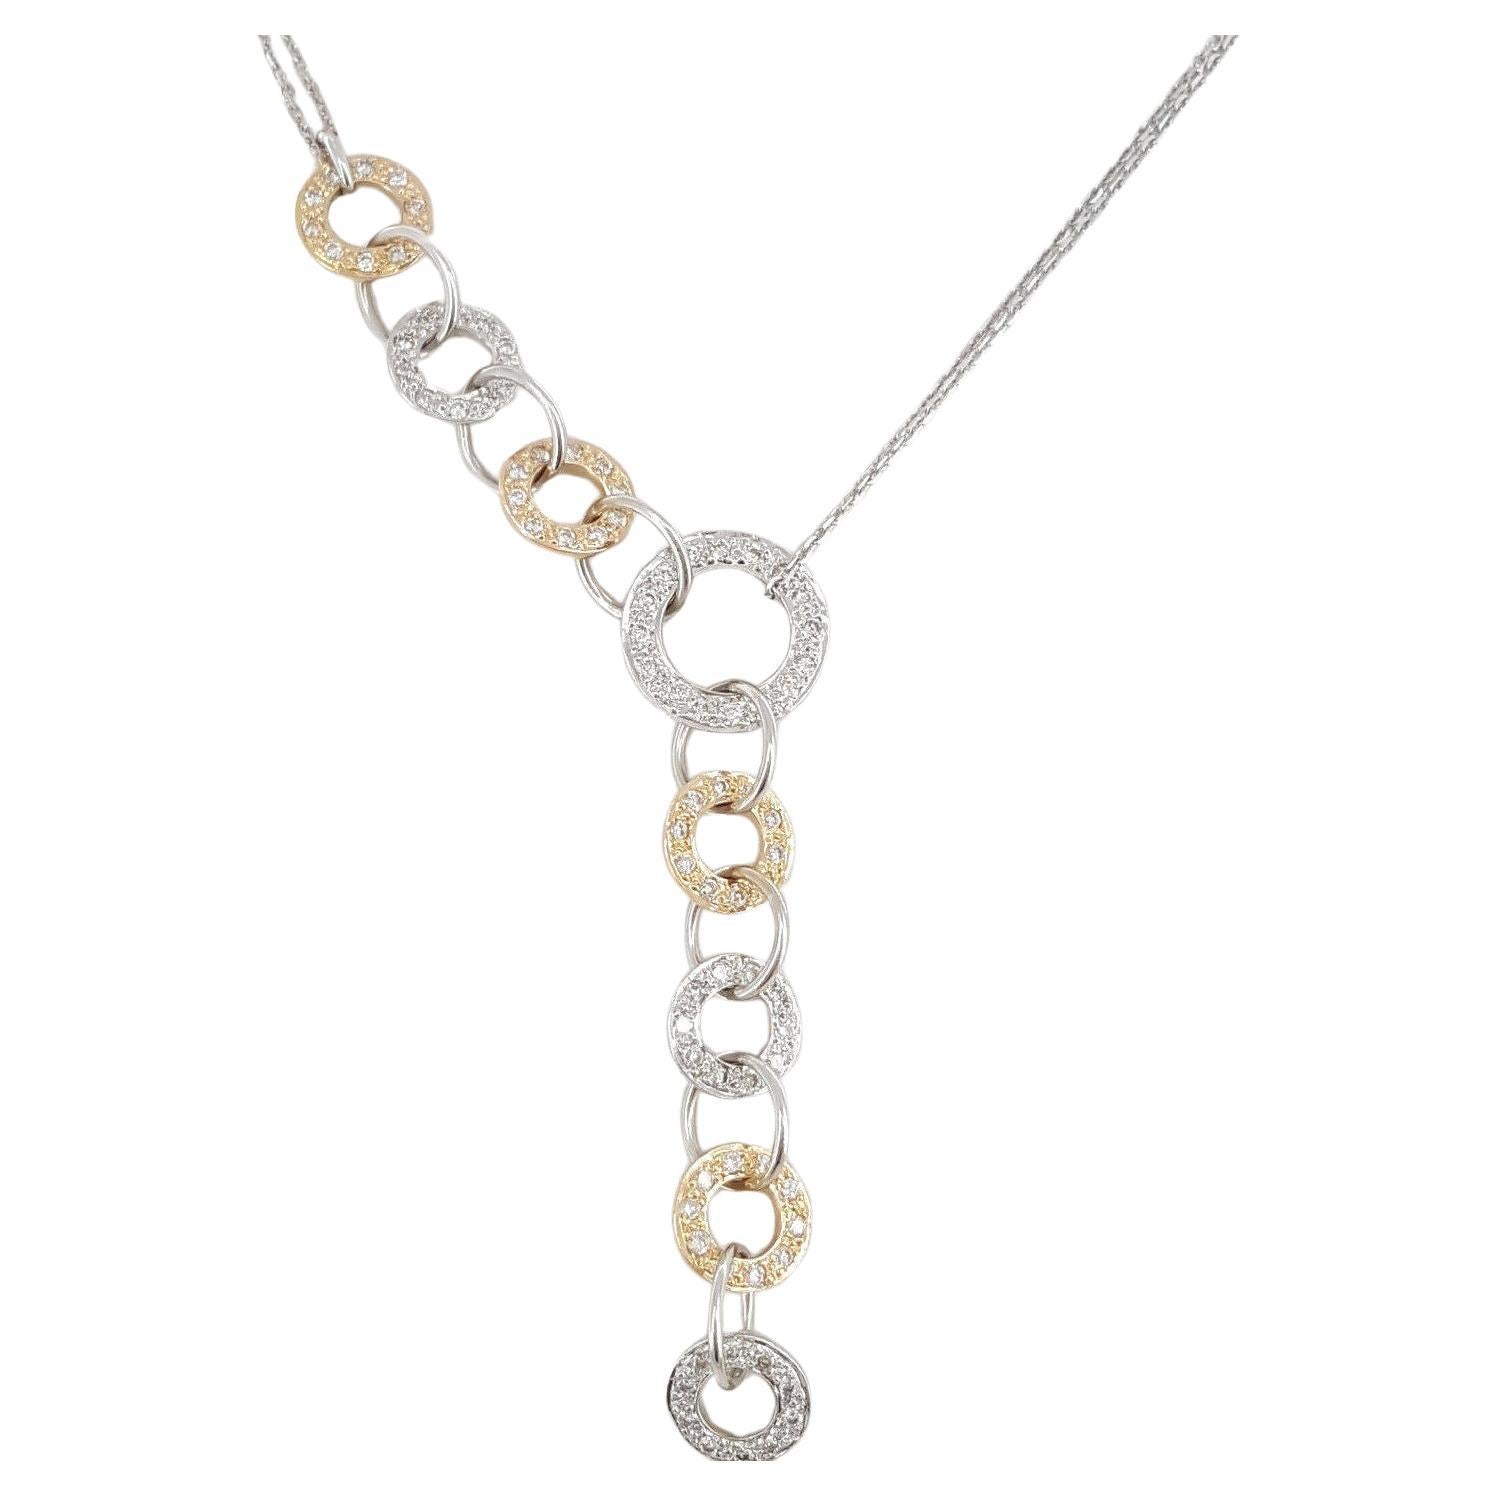 Double Chain Necklace crafted in 18k White & Rose Gold Circles Necklace For Sale